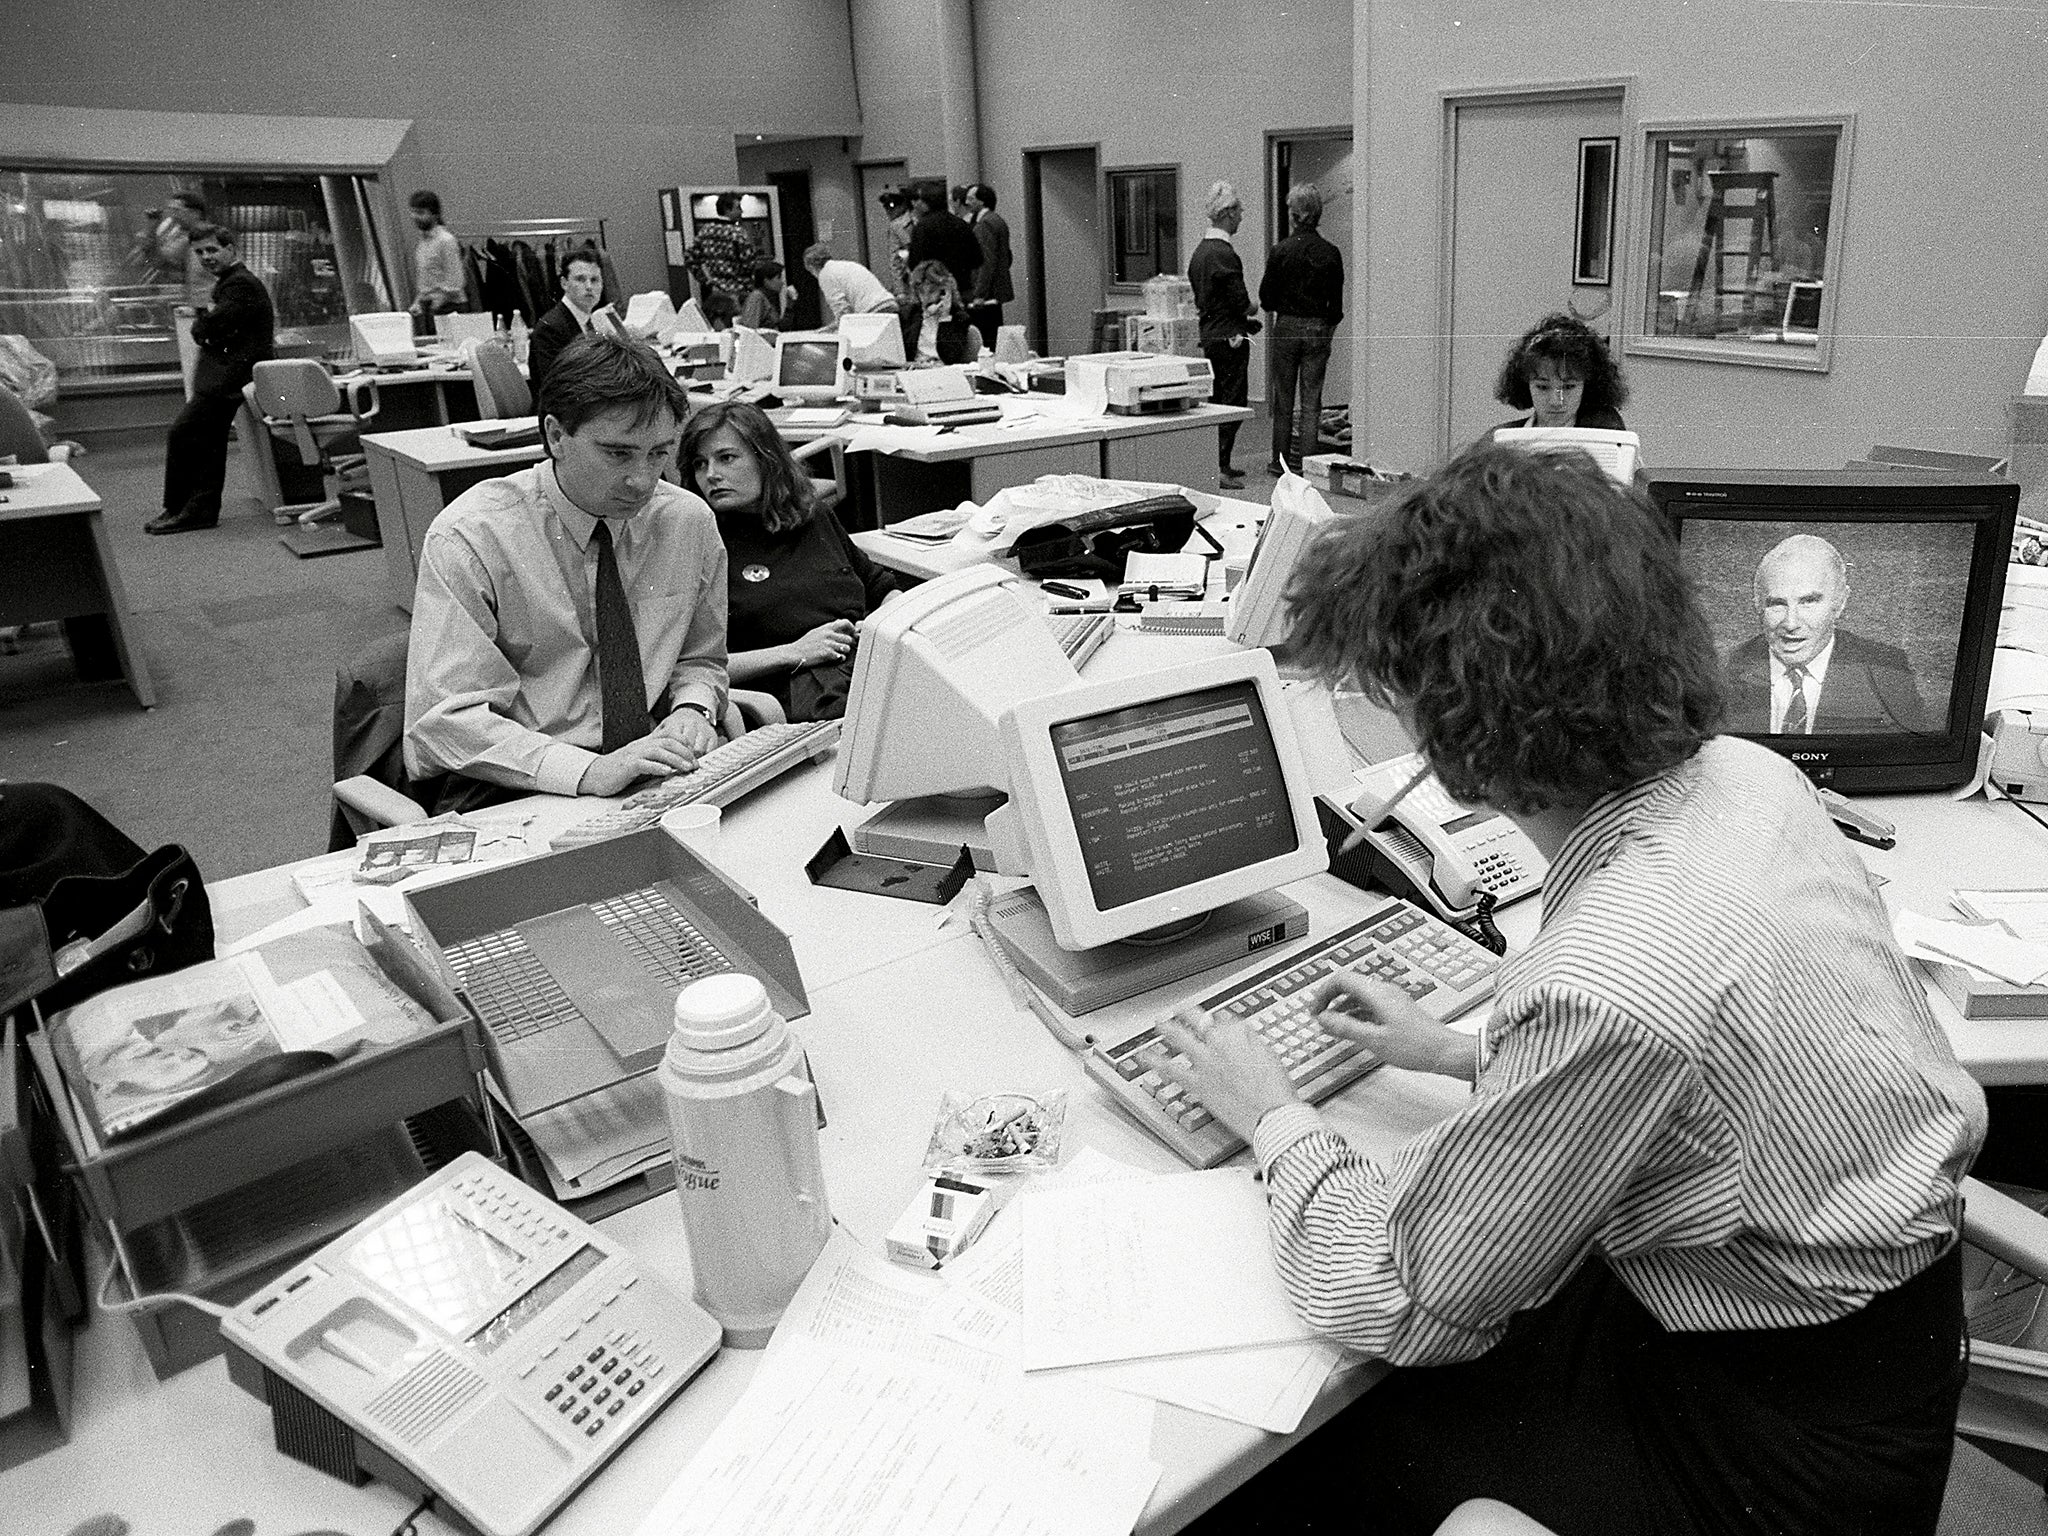 As readers become writers, a newsroom of journalists is becoming a thing of the past